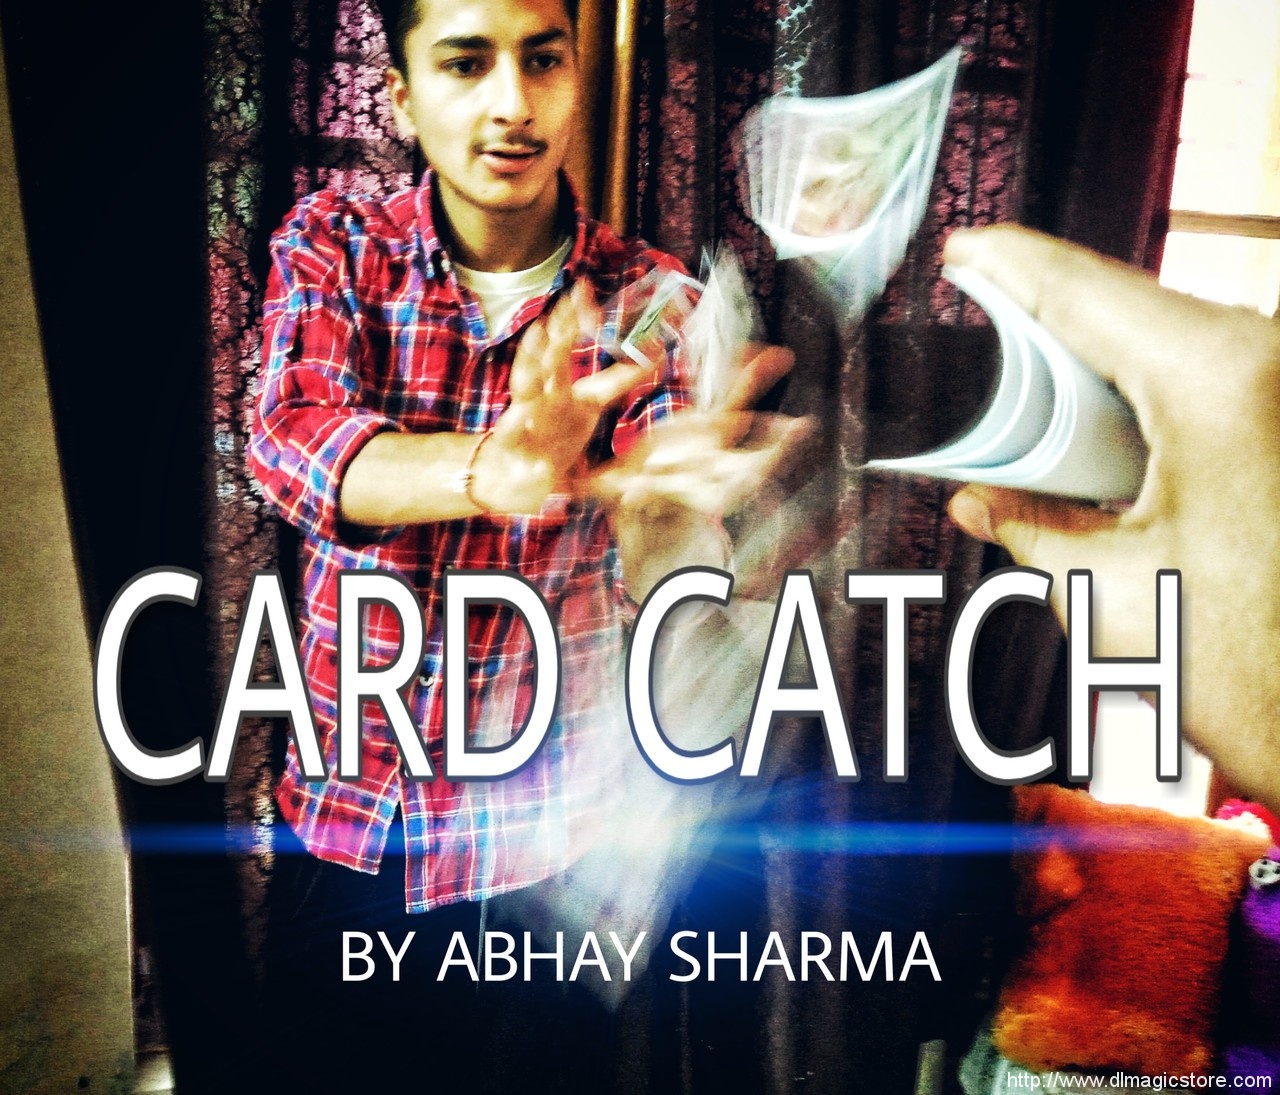 Card catch by abhay sharma (Instant Download)